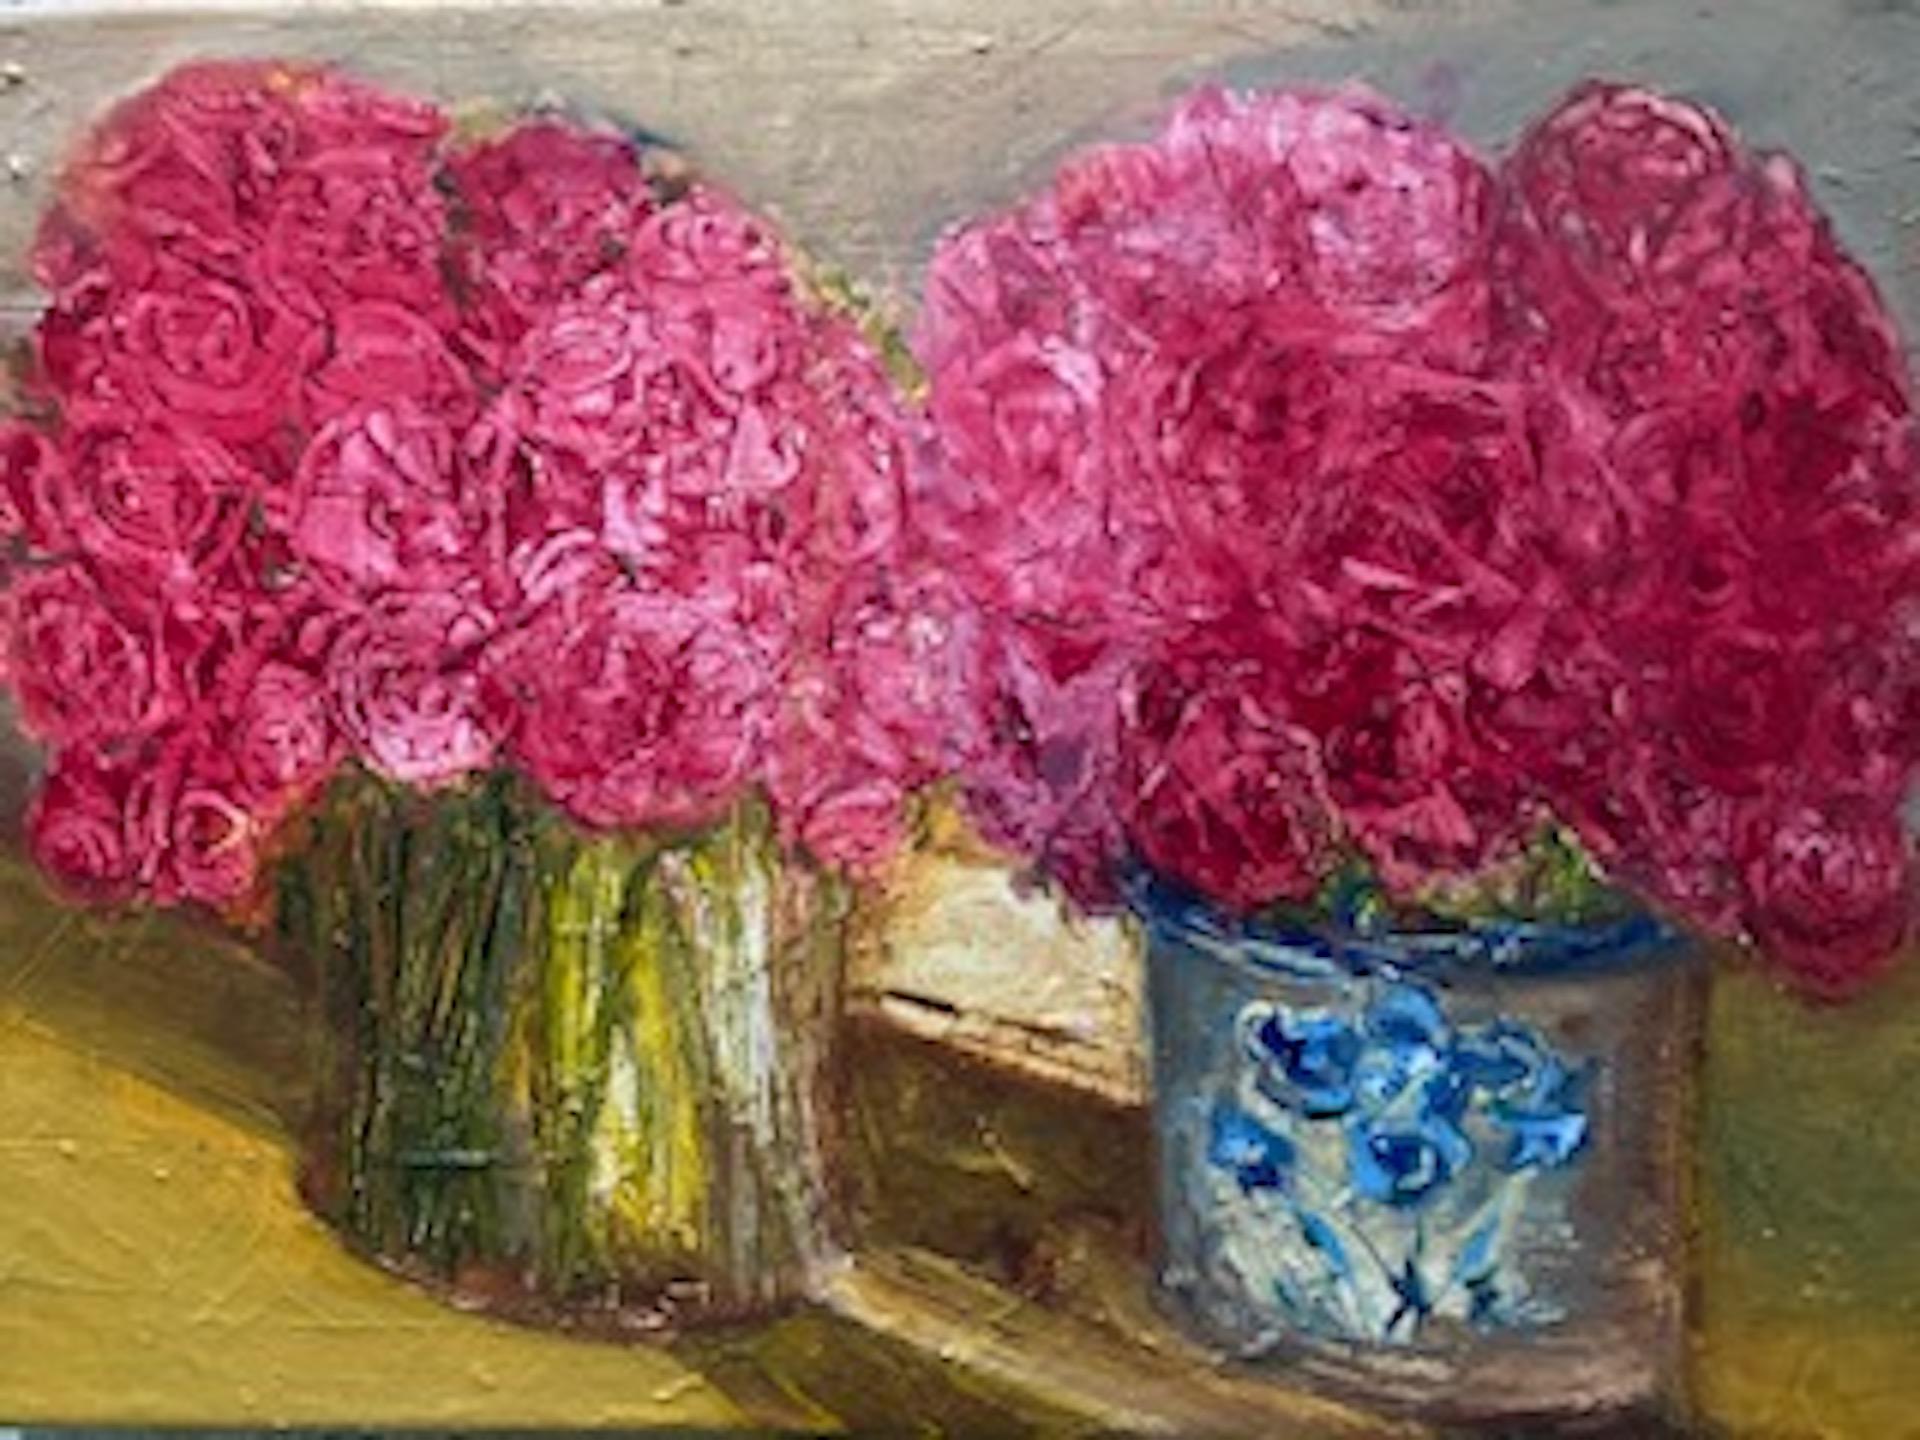 Henrietta Caledon
Pink Roses
Original Still Life Painting
Oil on Canvas
Size: H 26cm x W 36cm
Sold Unframed
(Please note that in situ images are purely an indication of how a piece may look).

Henrietta Caledon was born in London in 1964. Studied